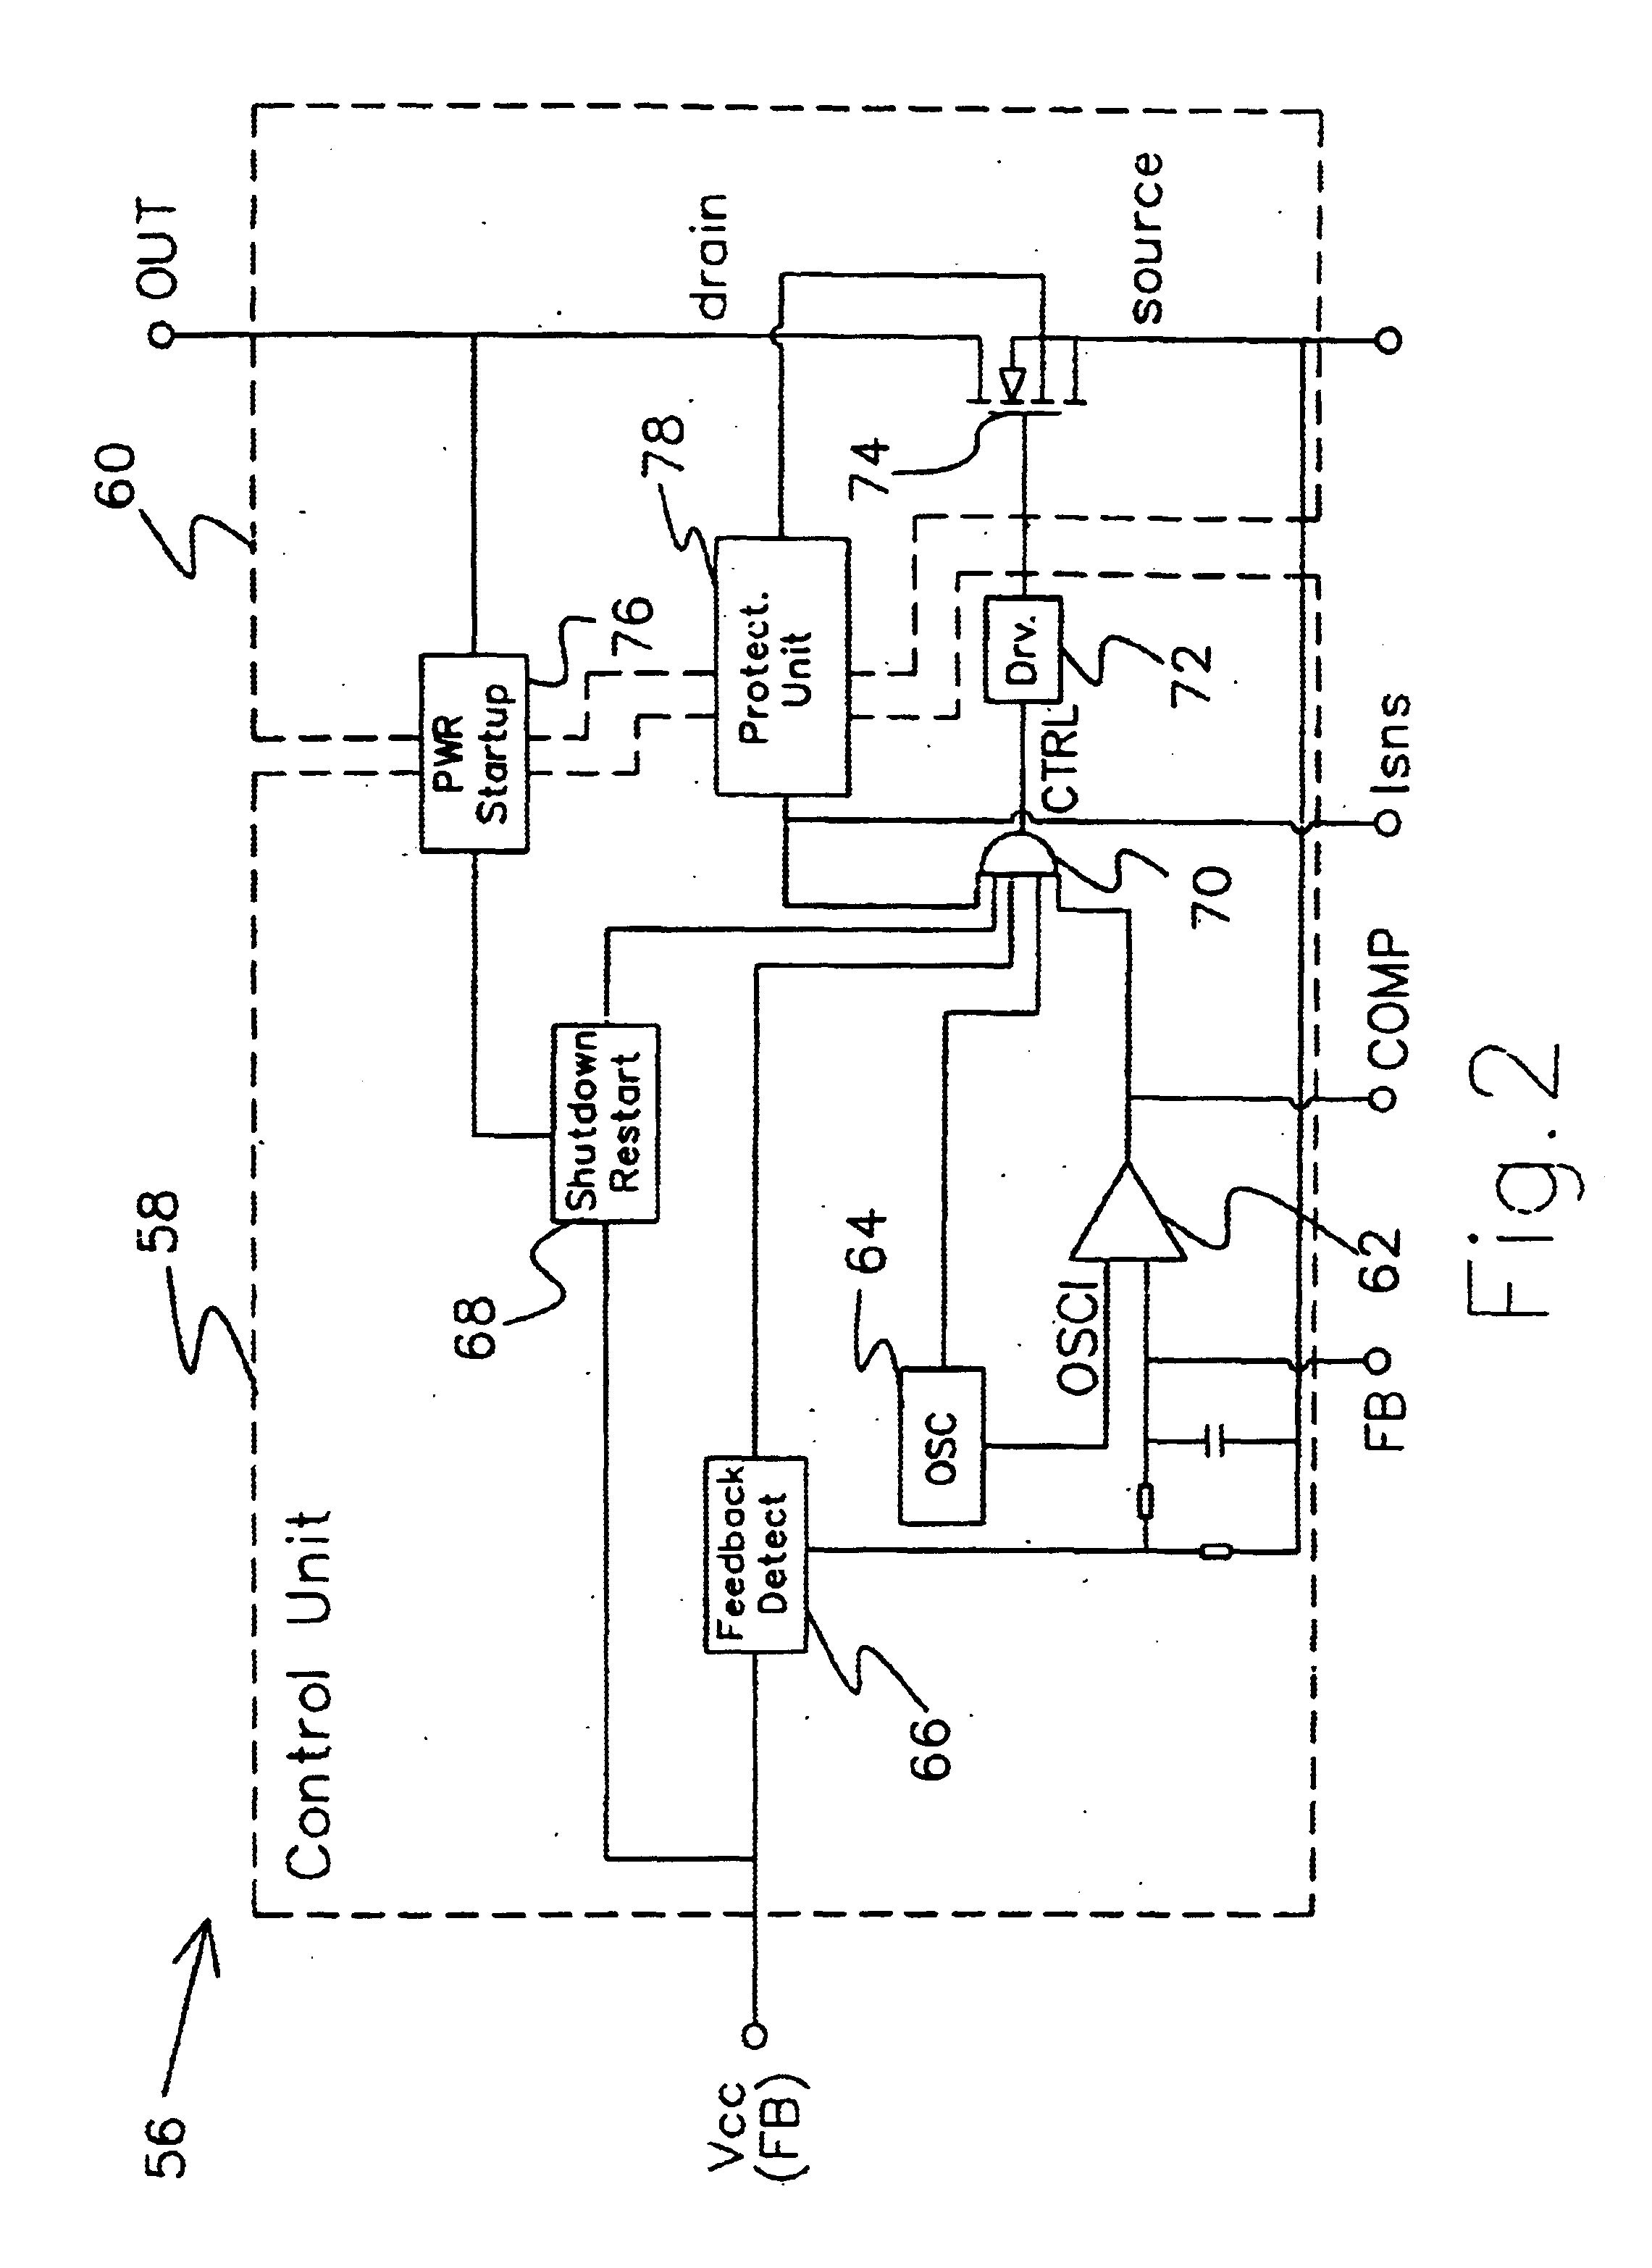 Power chip set for a switching mode power supply having a device for providing a drive signal to a control unit upon startup